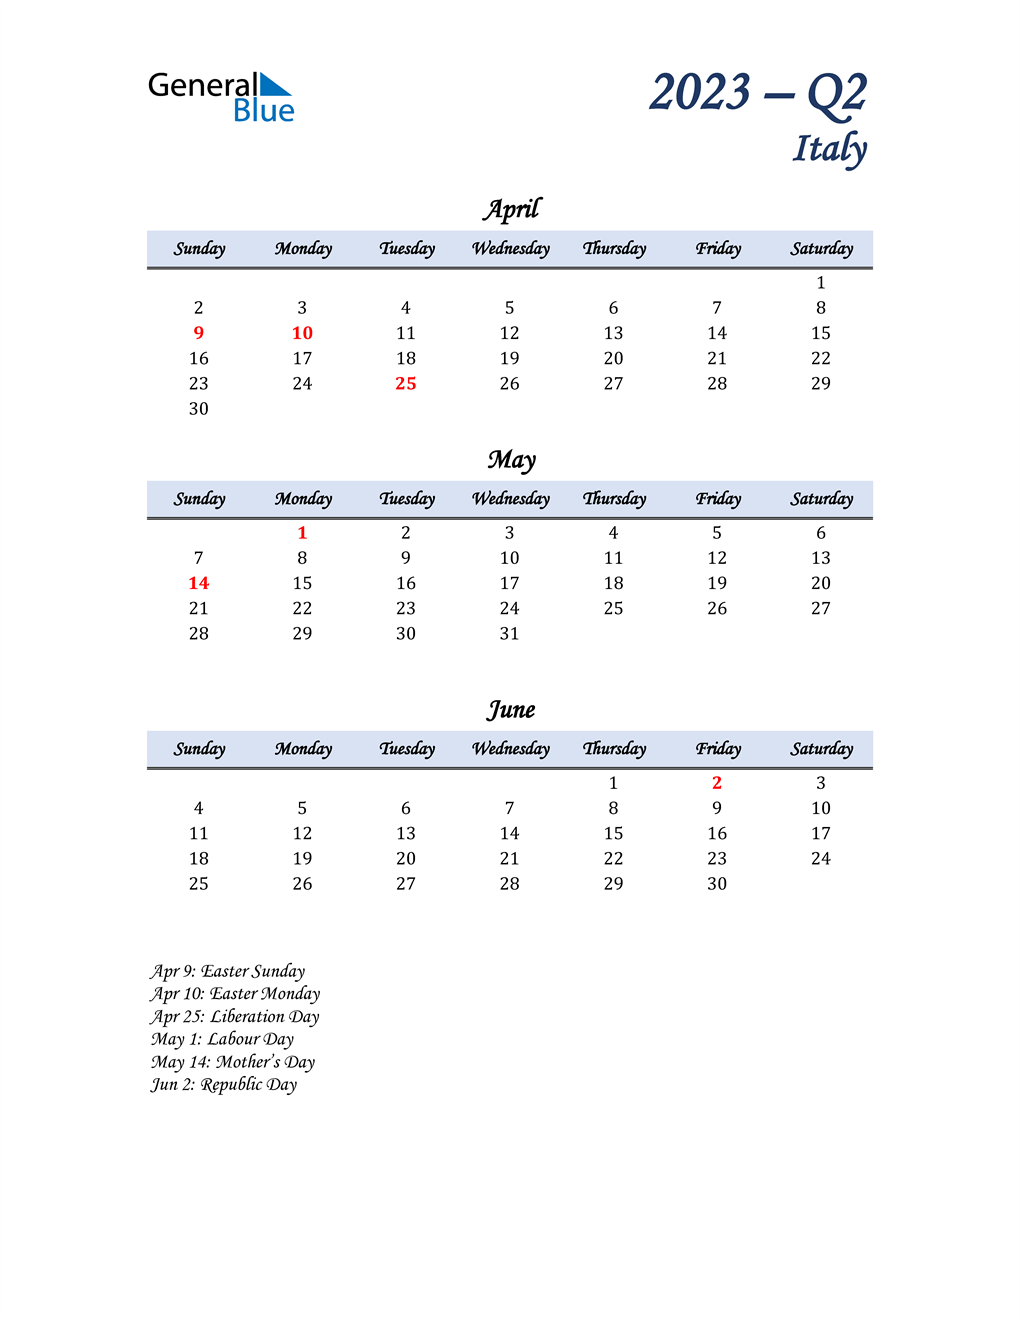  April, May, and June Calendar for Italy